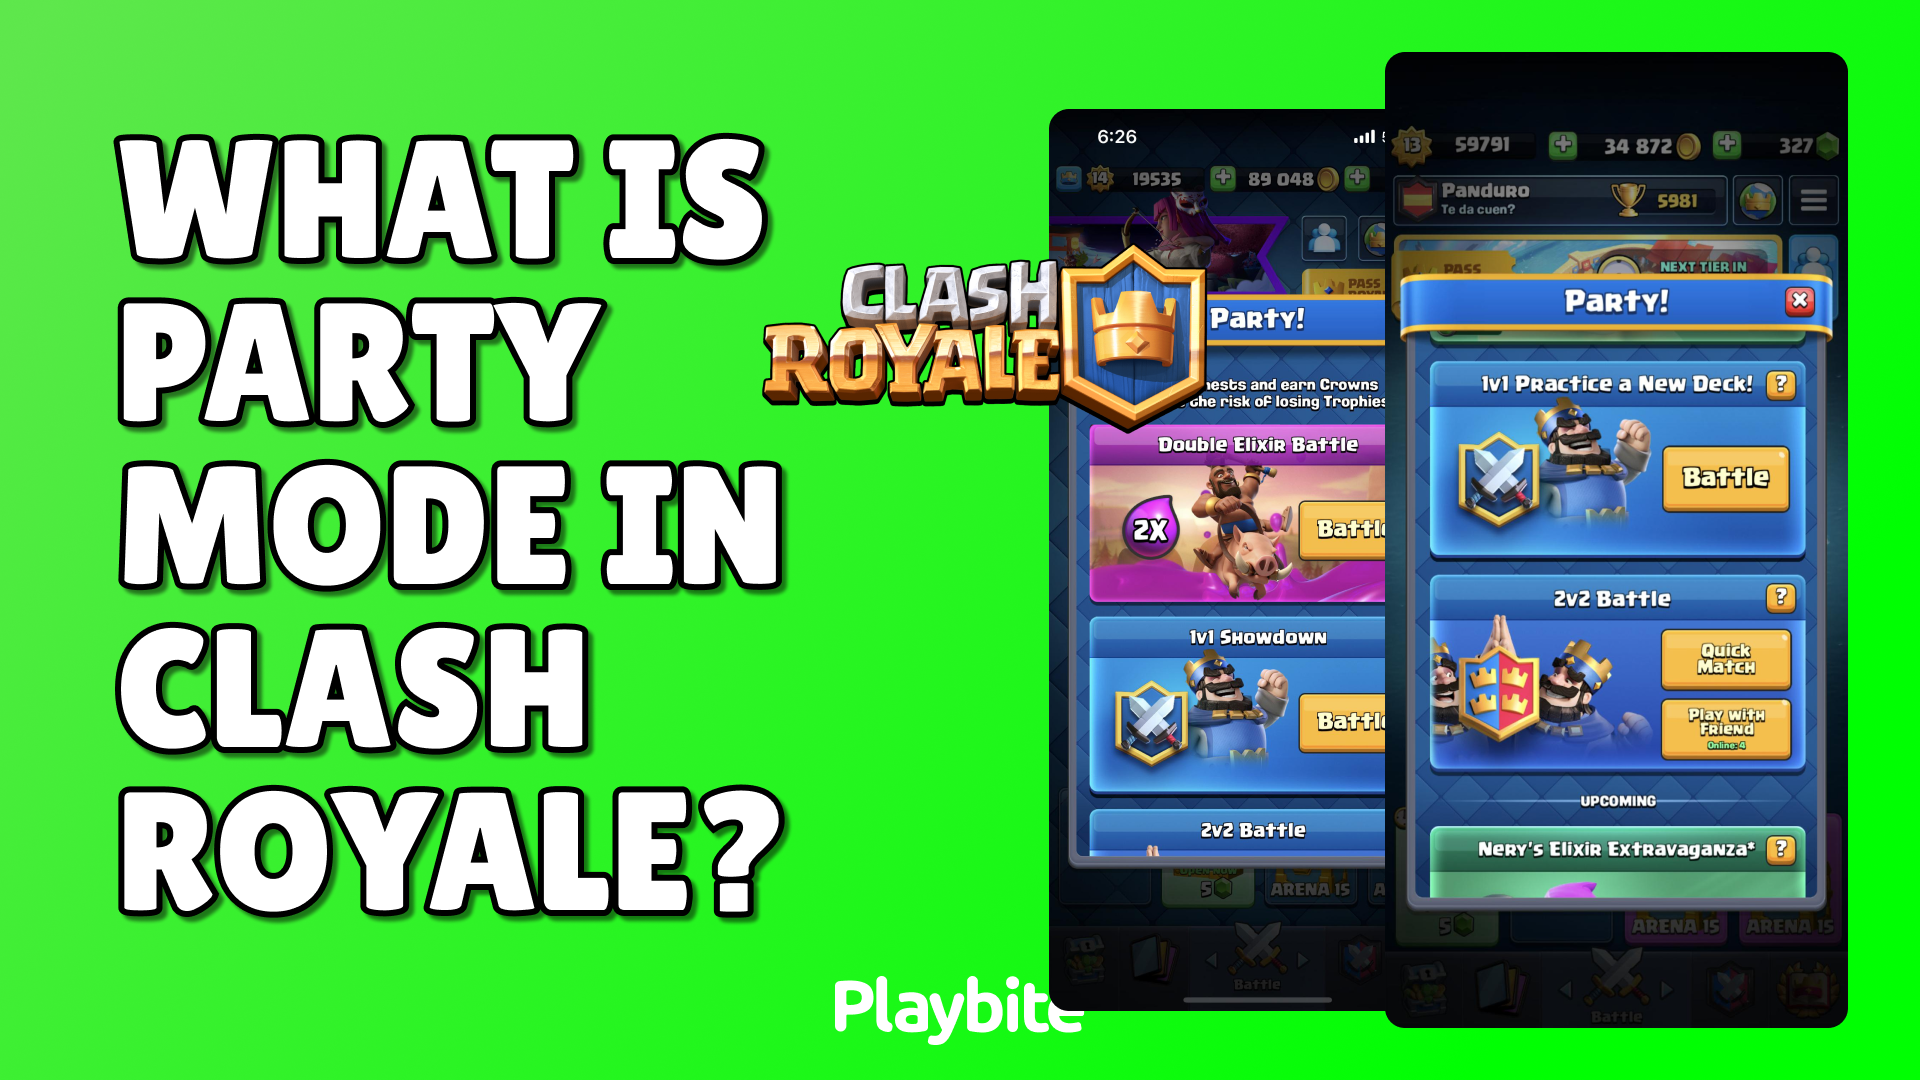 What Is Party Mode In Clash Royale?